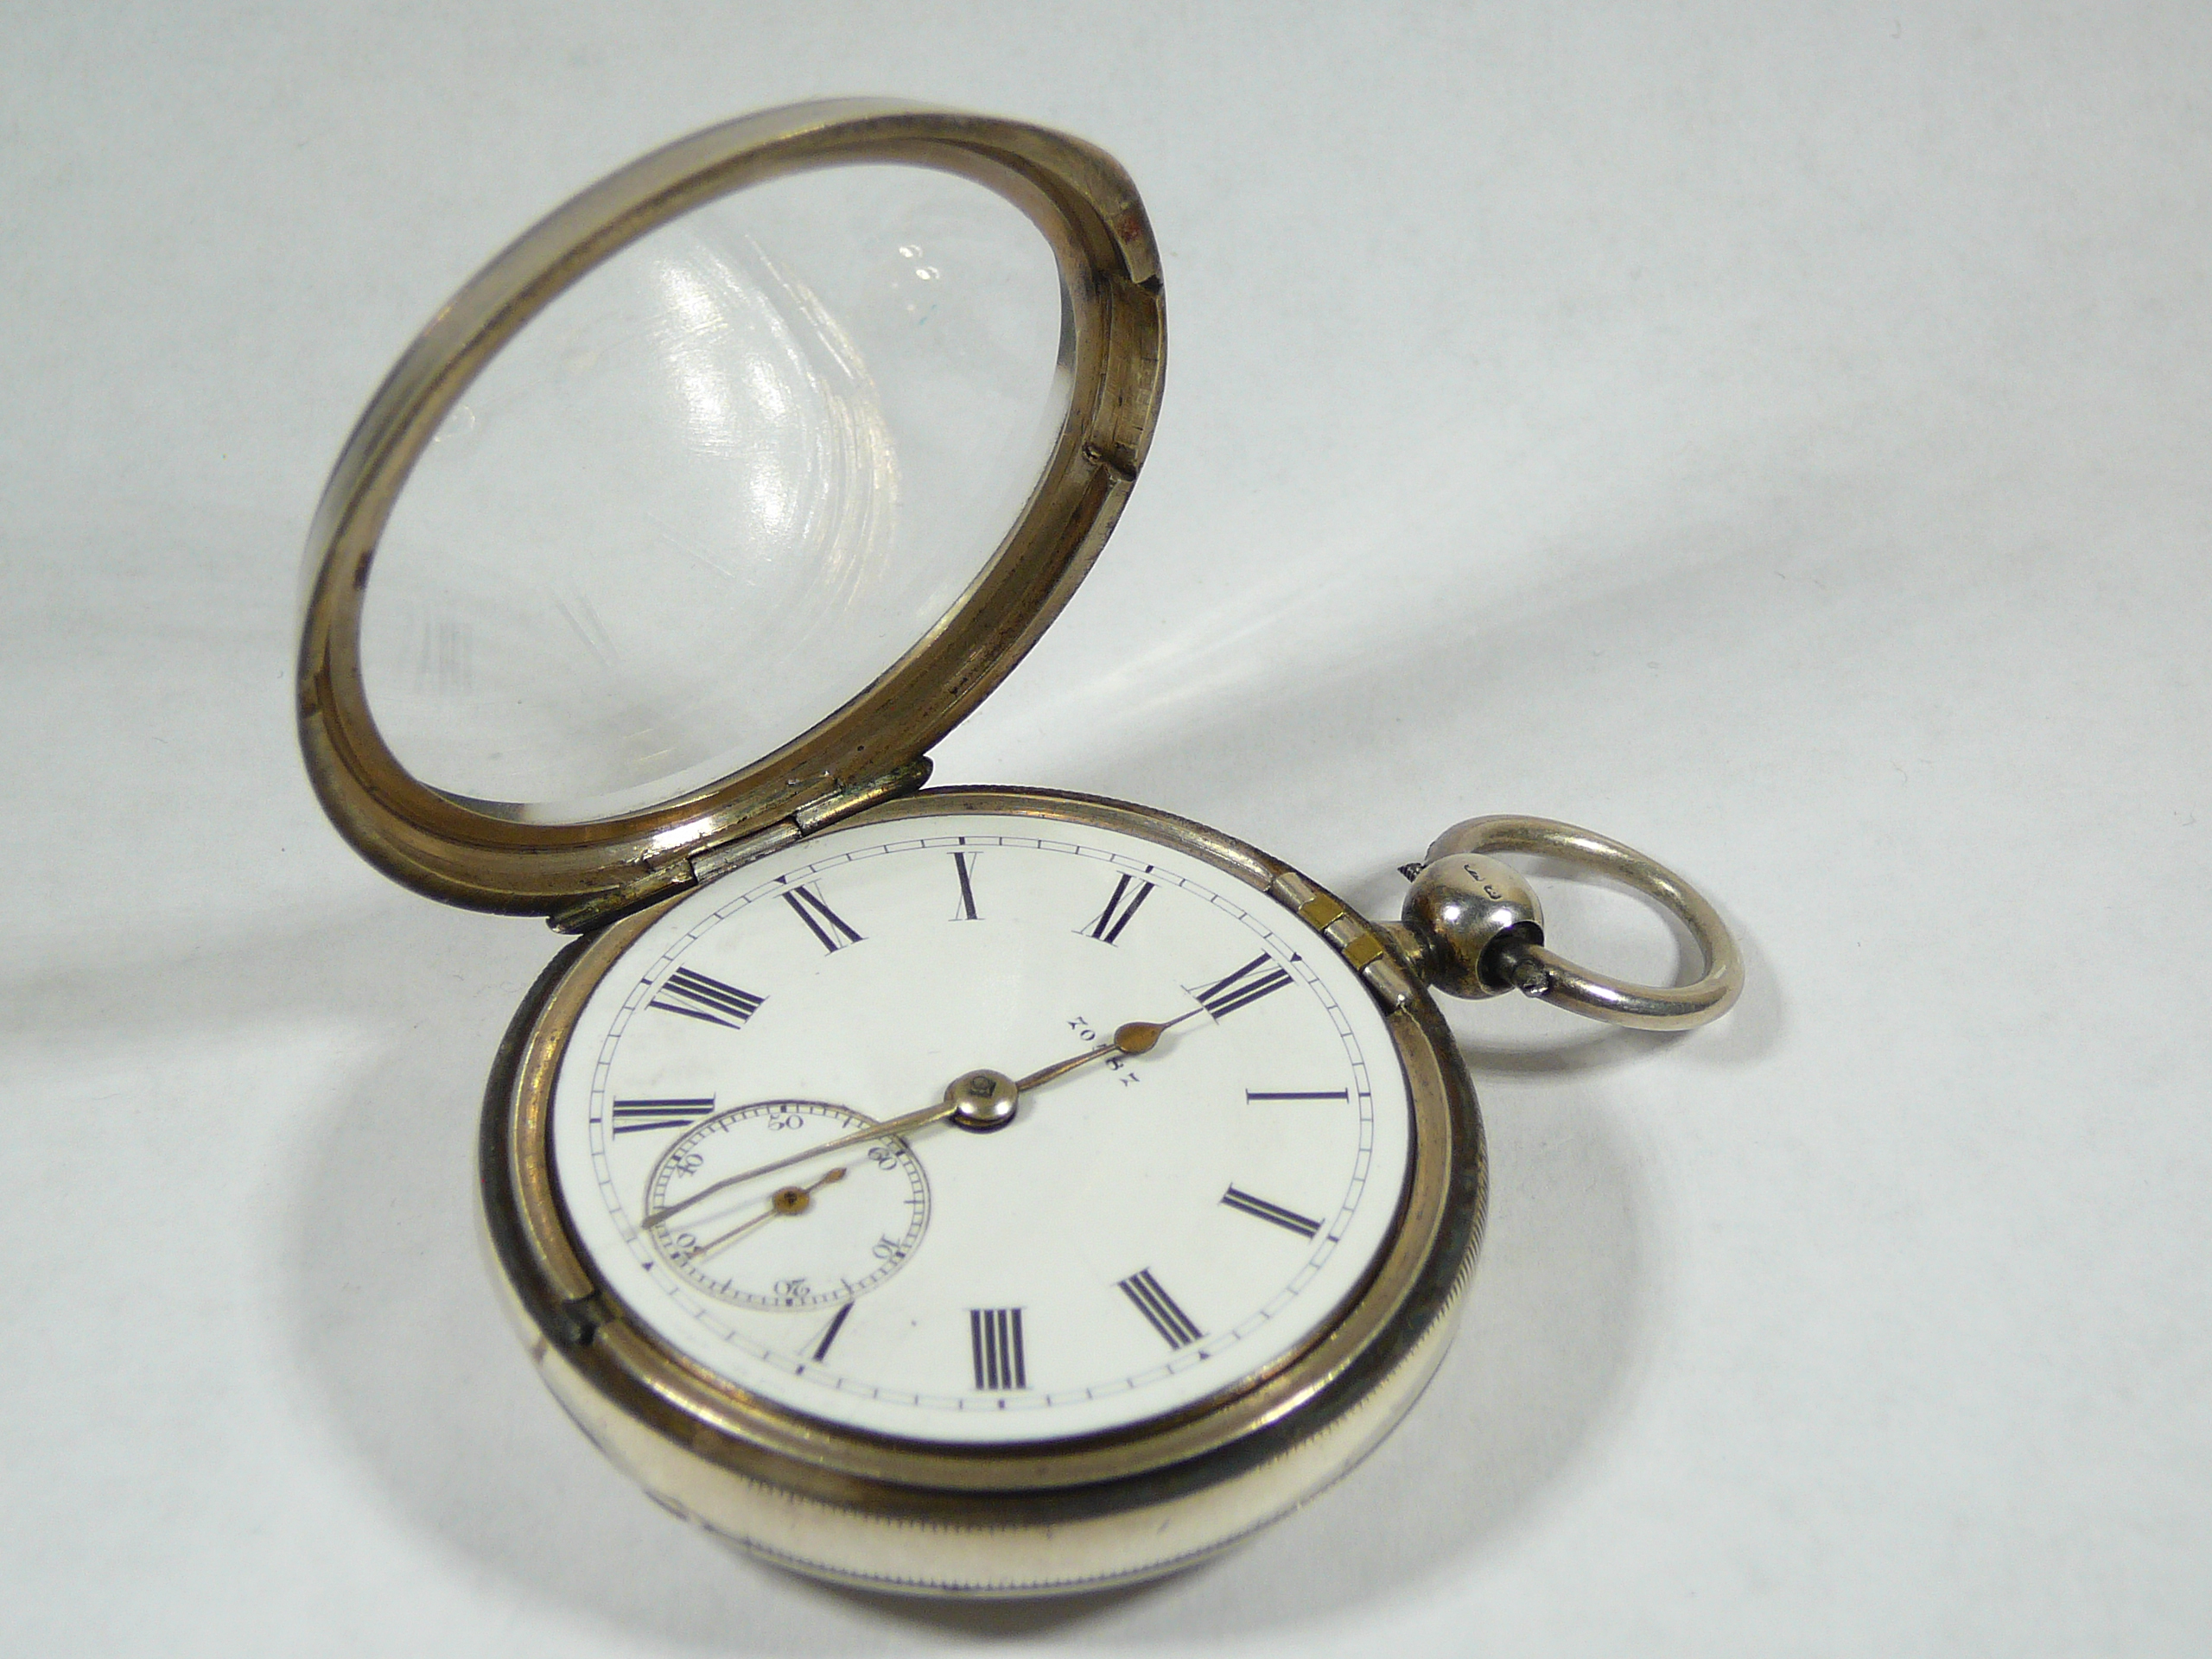 Gents Antique Silver Pocket Watch - Image 3 of 4